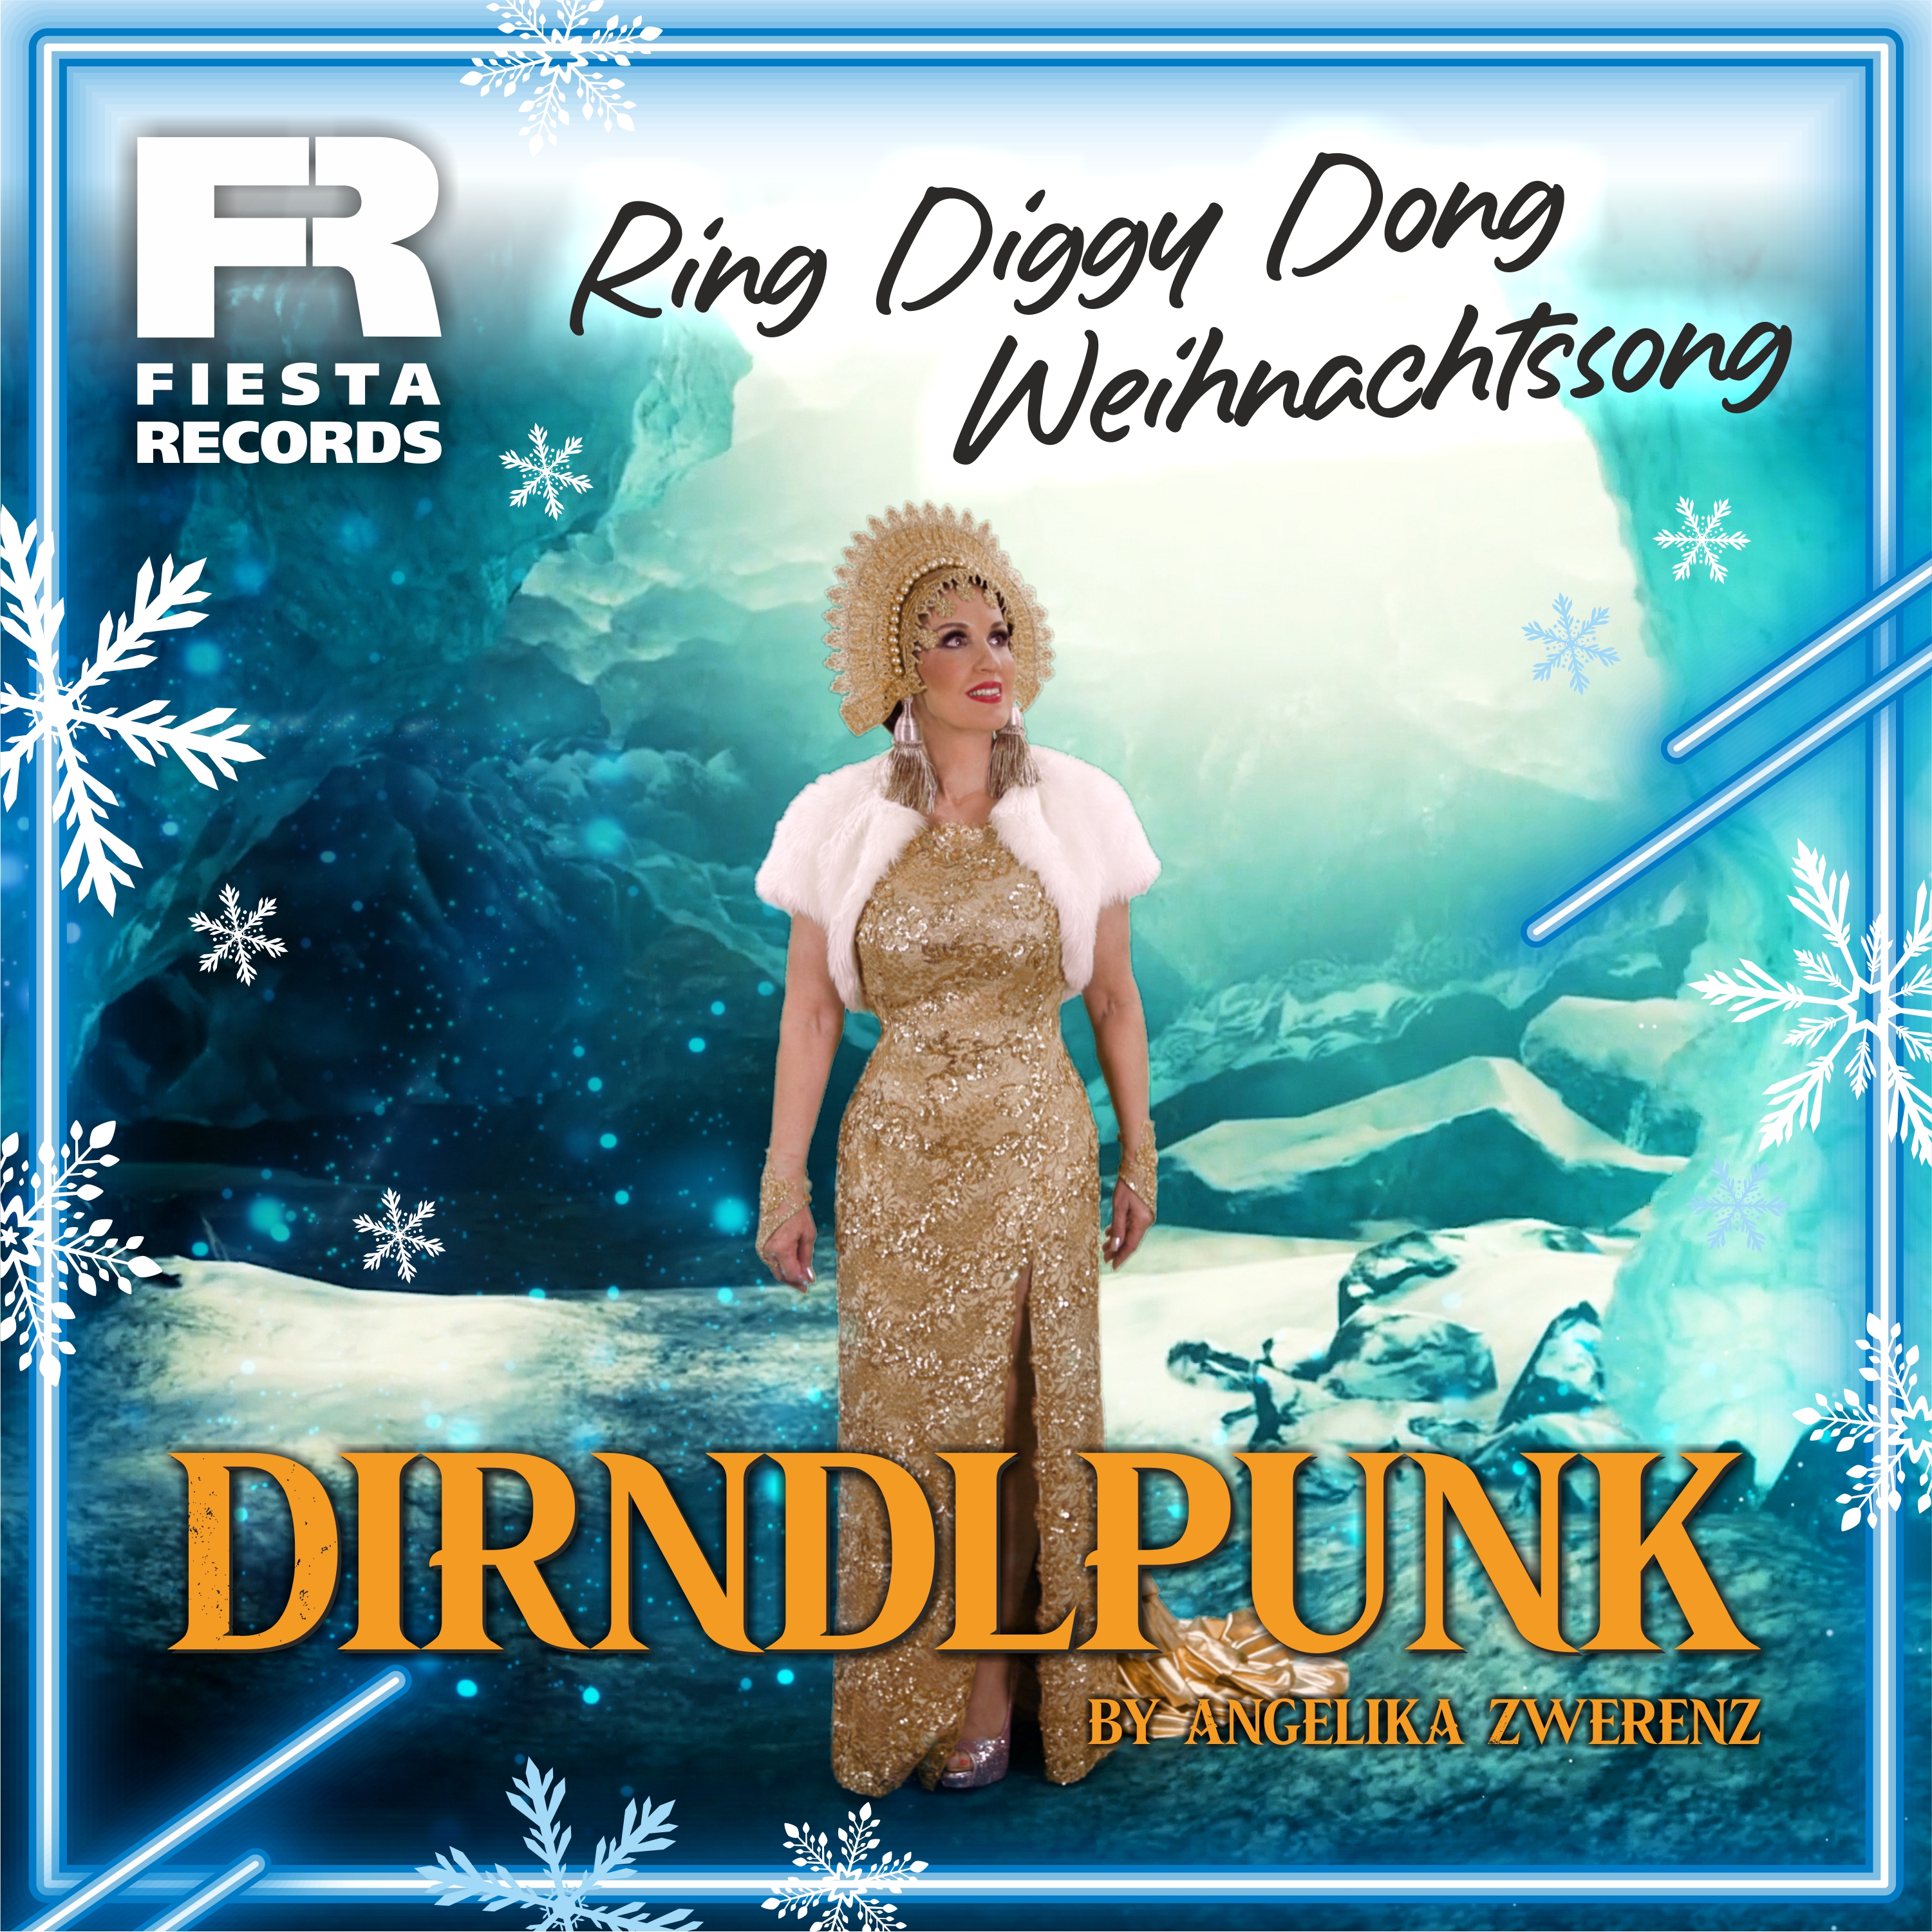 DIRNLPUNK * Ring Diggy Dong Weihnachtssong (Download-Track)